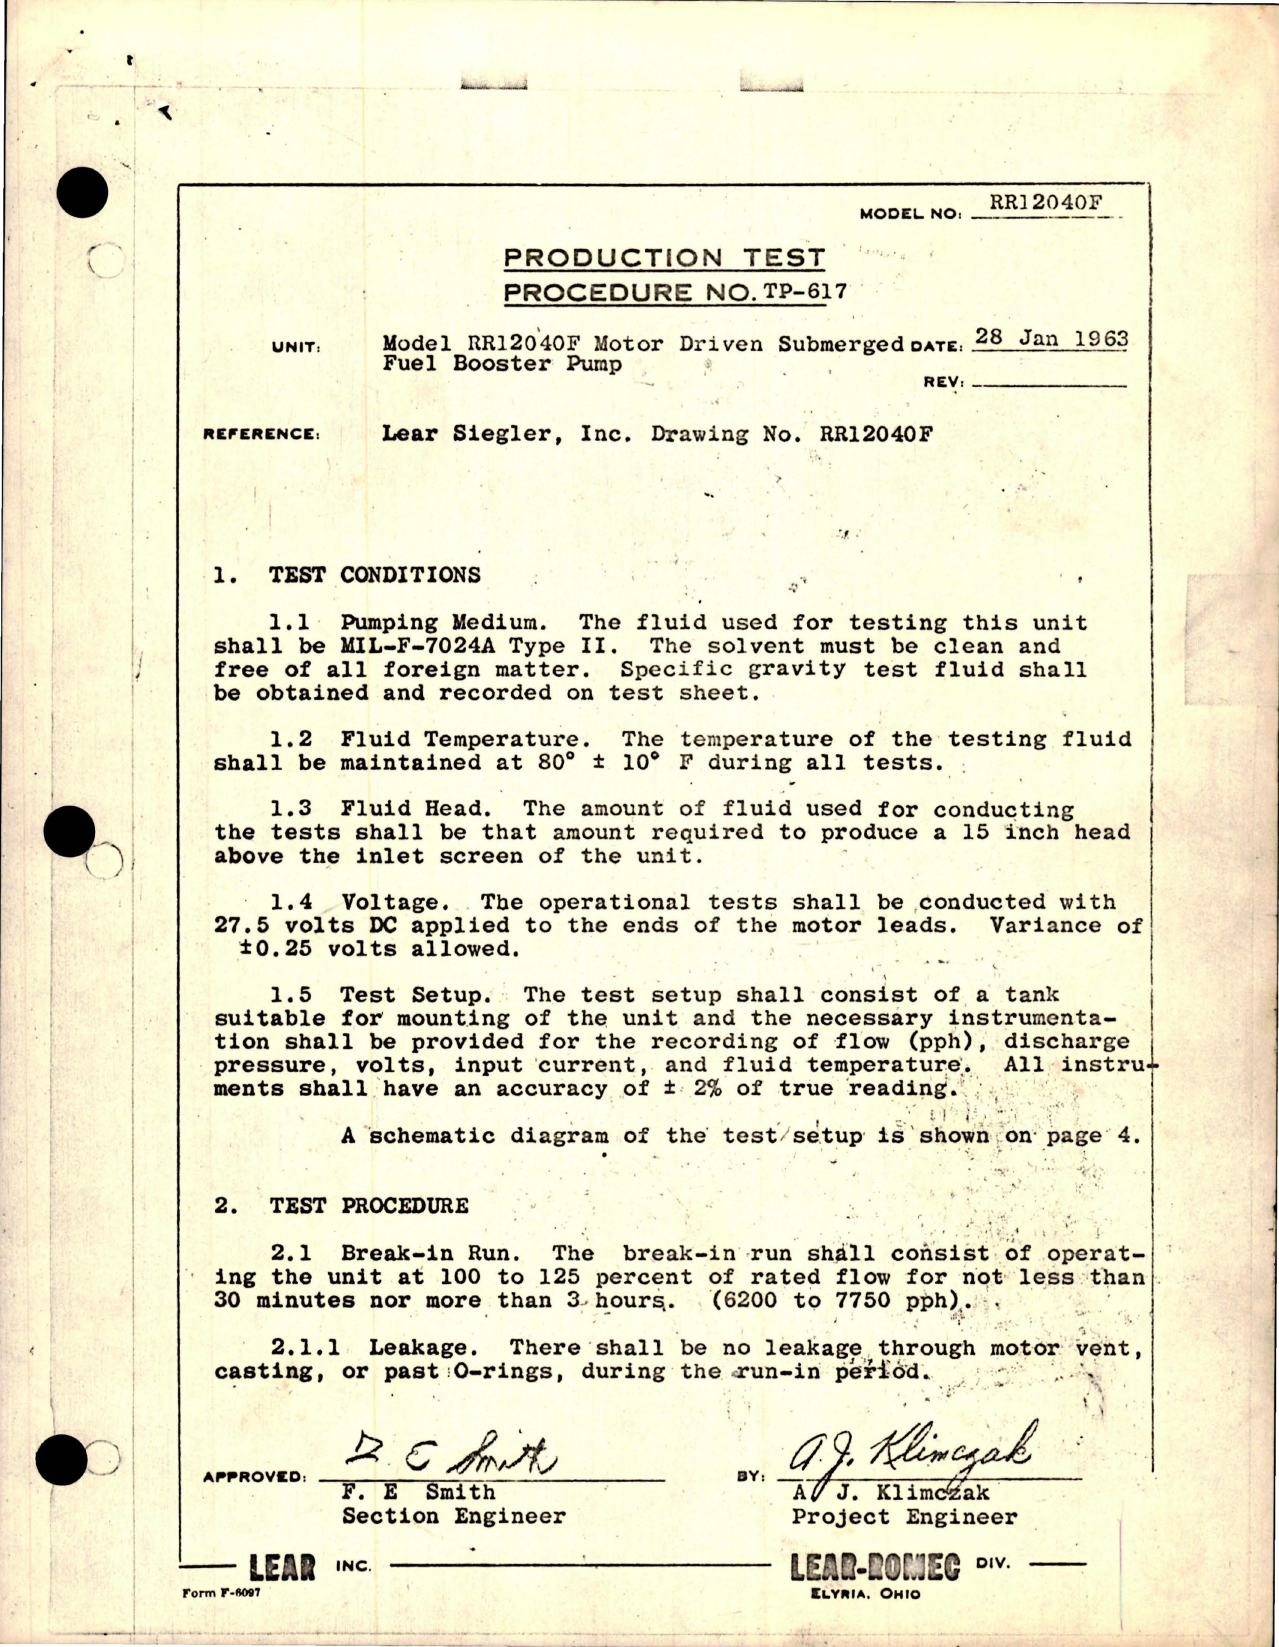 Sample page 1 from AirCorps Library document: Production Test Procedure for Motor Driven Submerged Fuel Booster Pump - Model RR12040F 